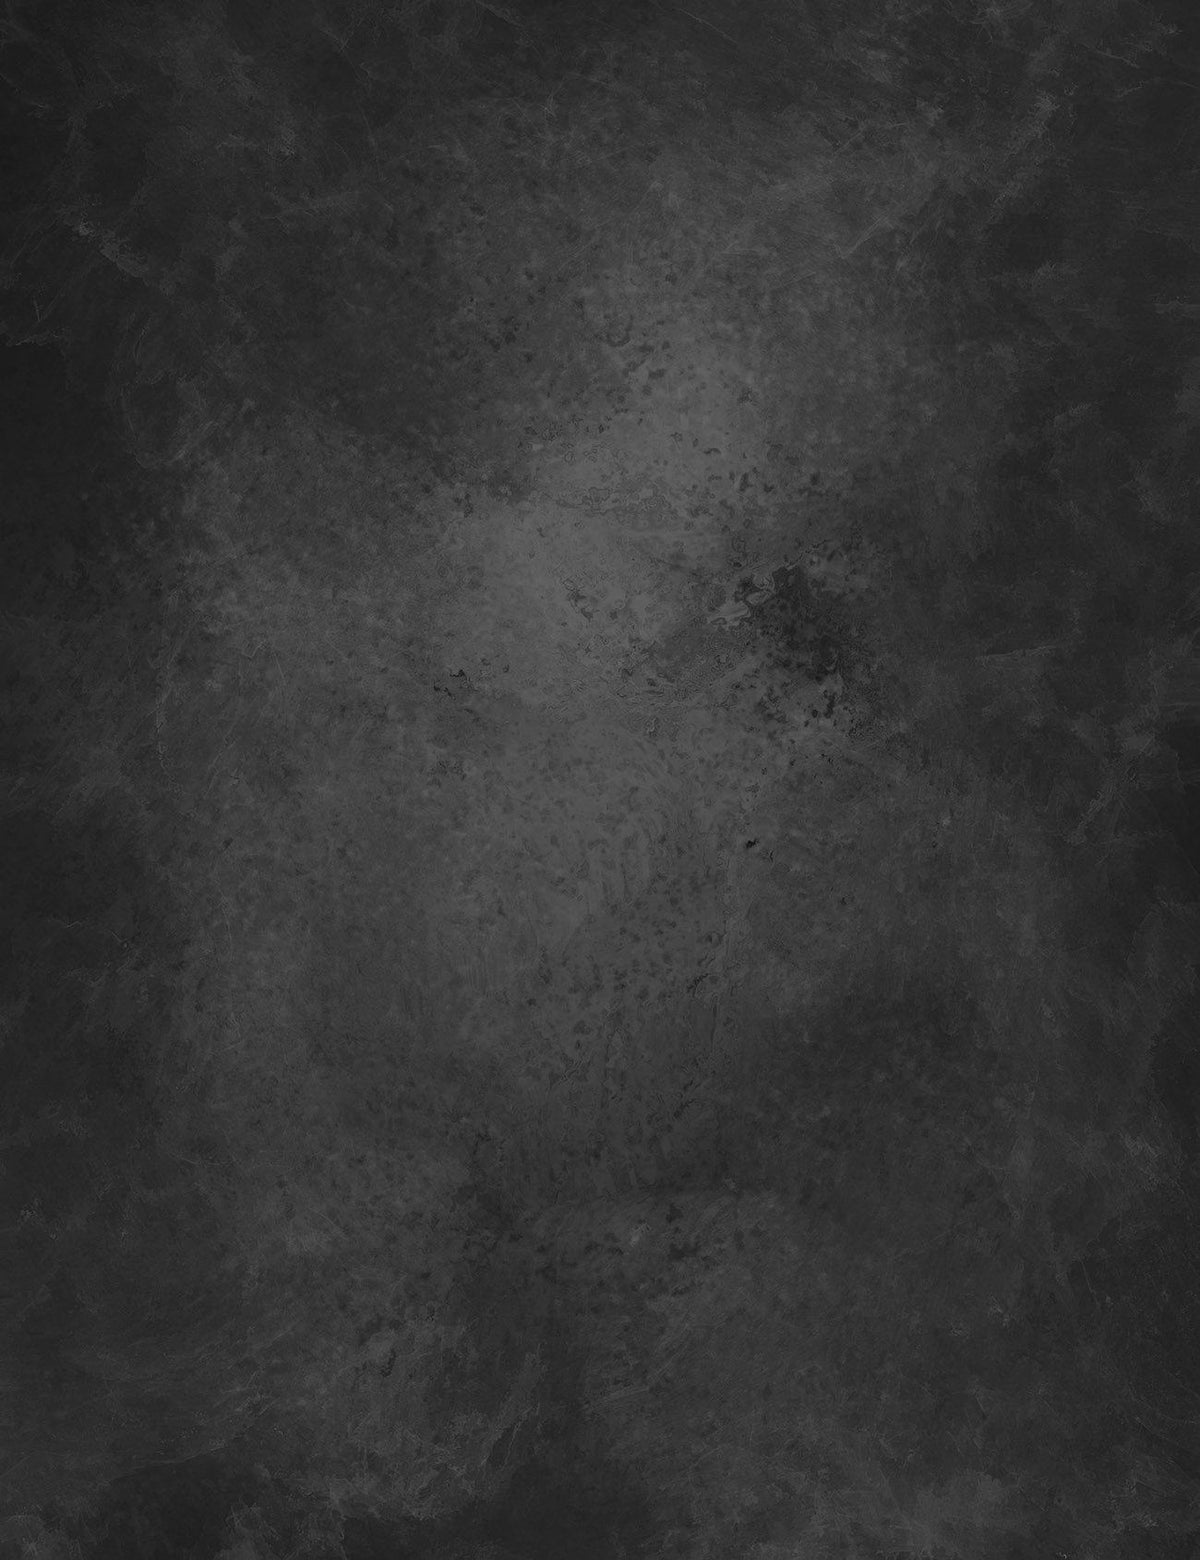 Dark Background With Marble Texture Backdrop For Photography Shopbackdrop